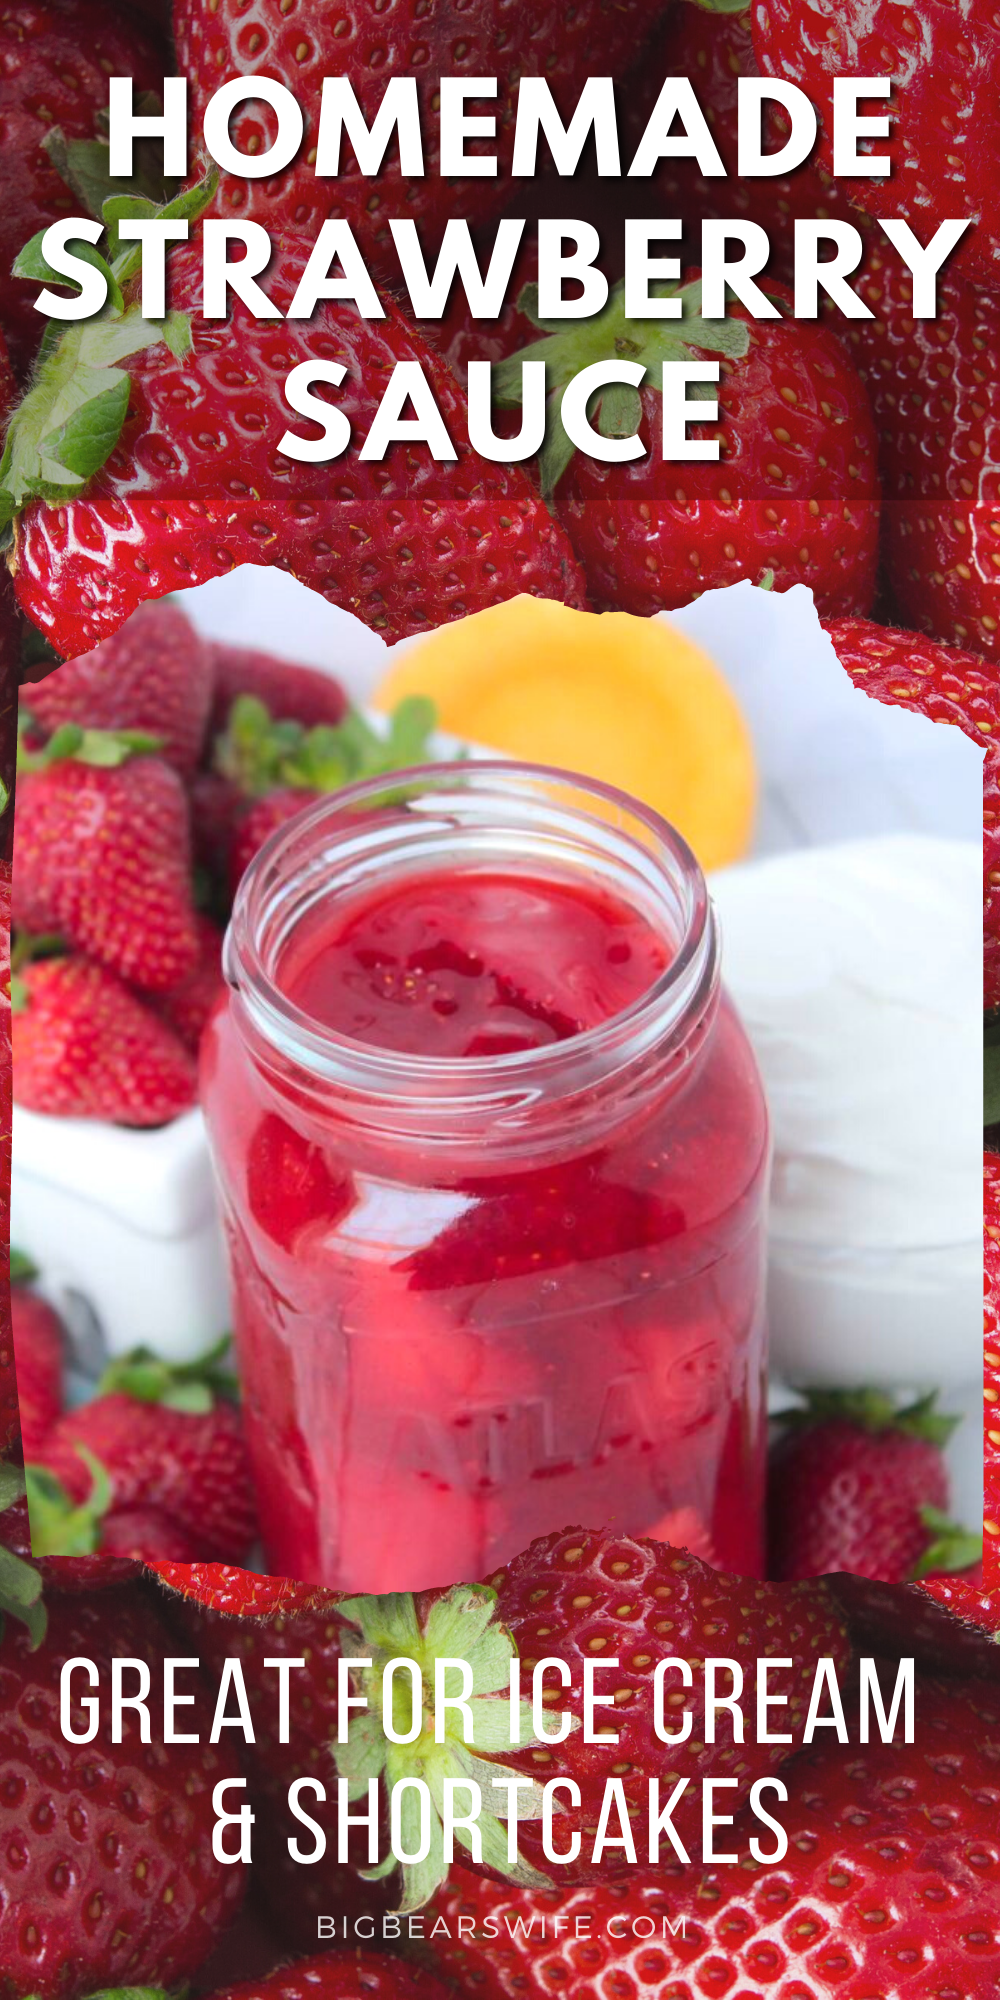 Sweet Homemade Strawberry Sauce that's perfect for topping ice cream, shortcakes and yogurt! It's so good that you could even eat it with a spoon with some cool whip! via @bigbearswife